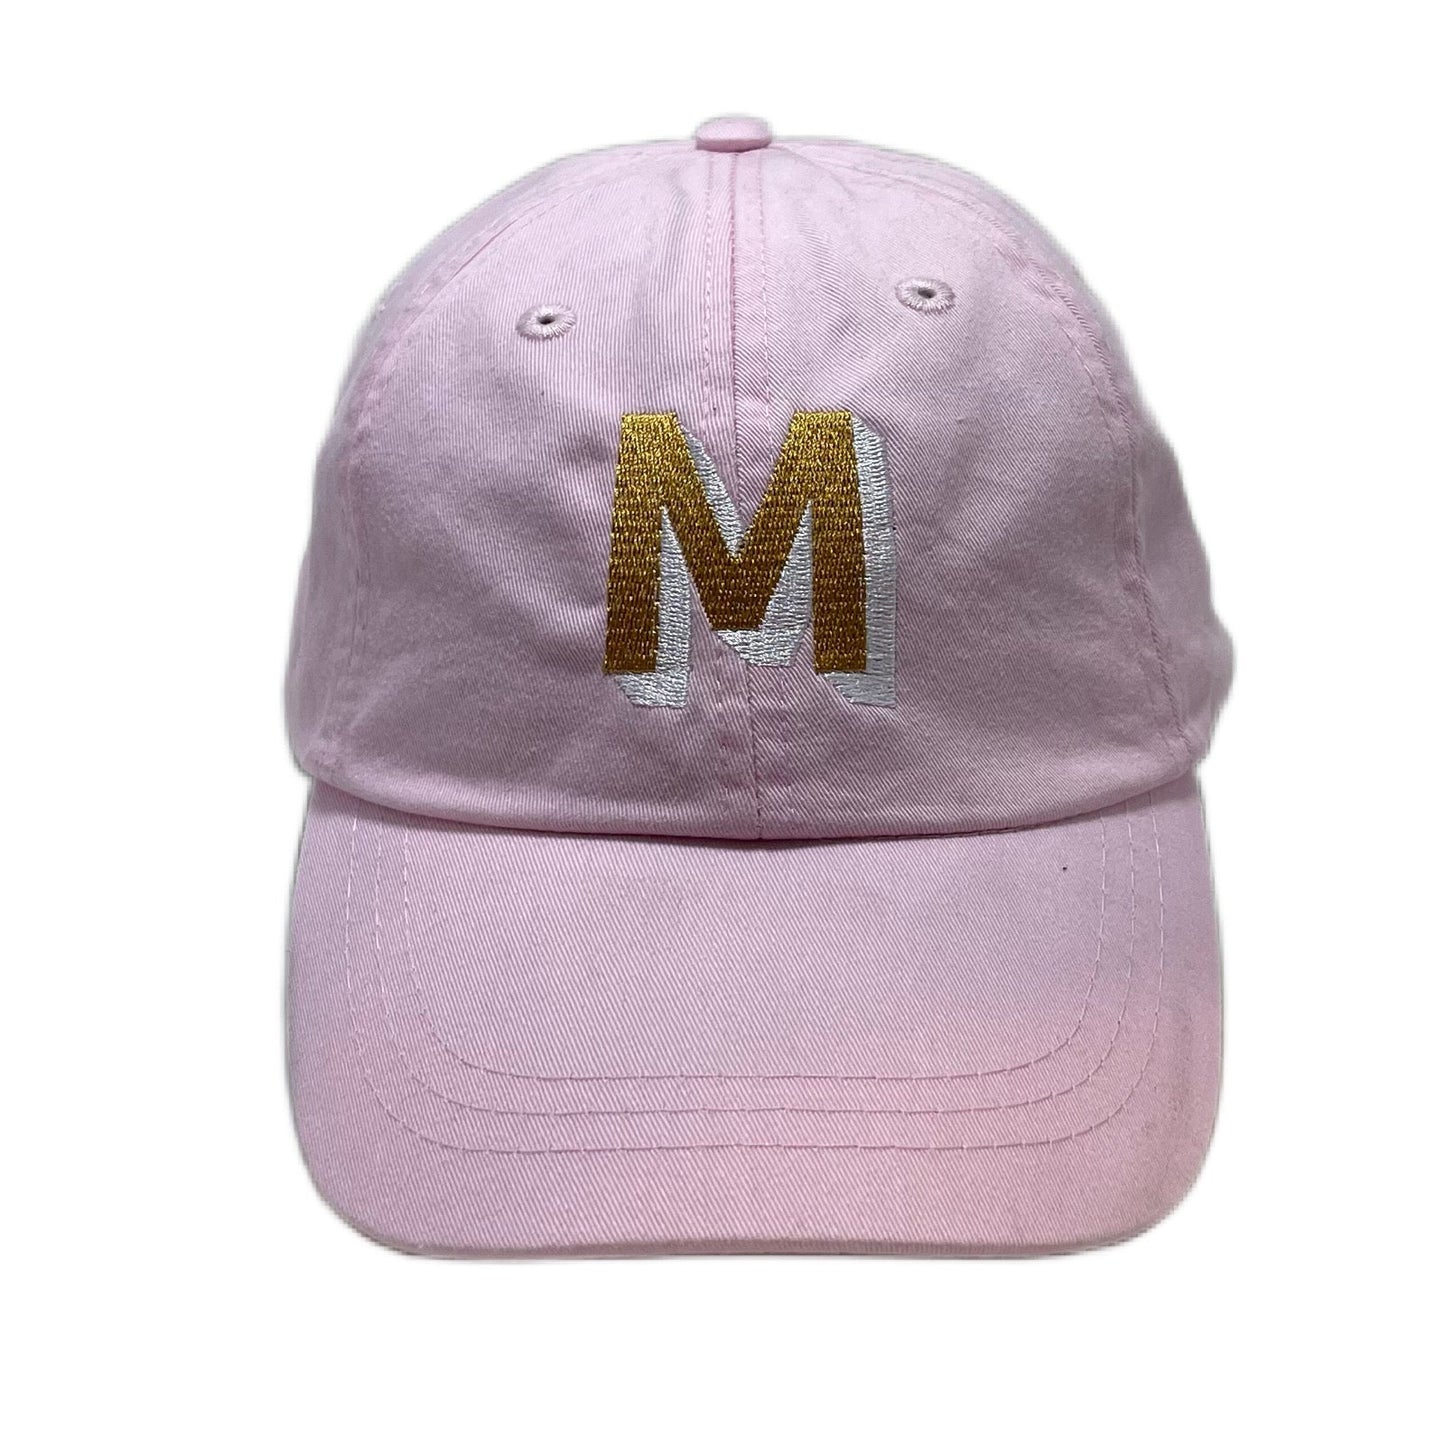 White Dad Hat - Pink & Green Shadow Block Lettering